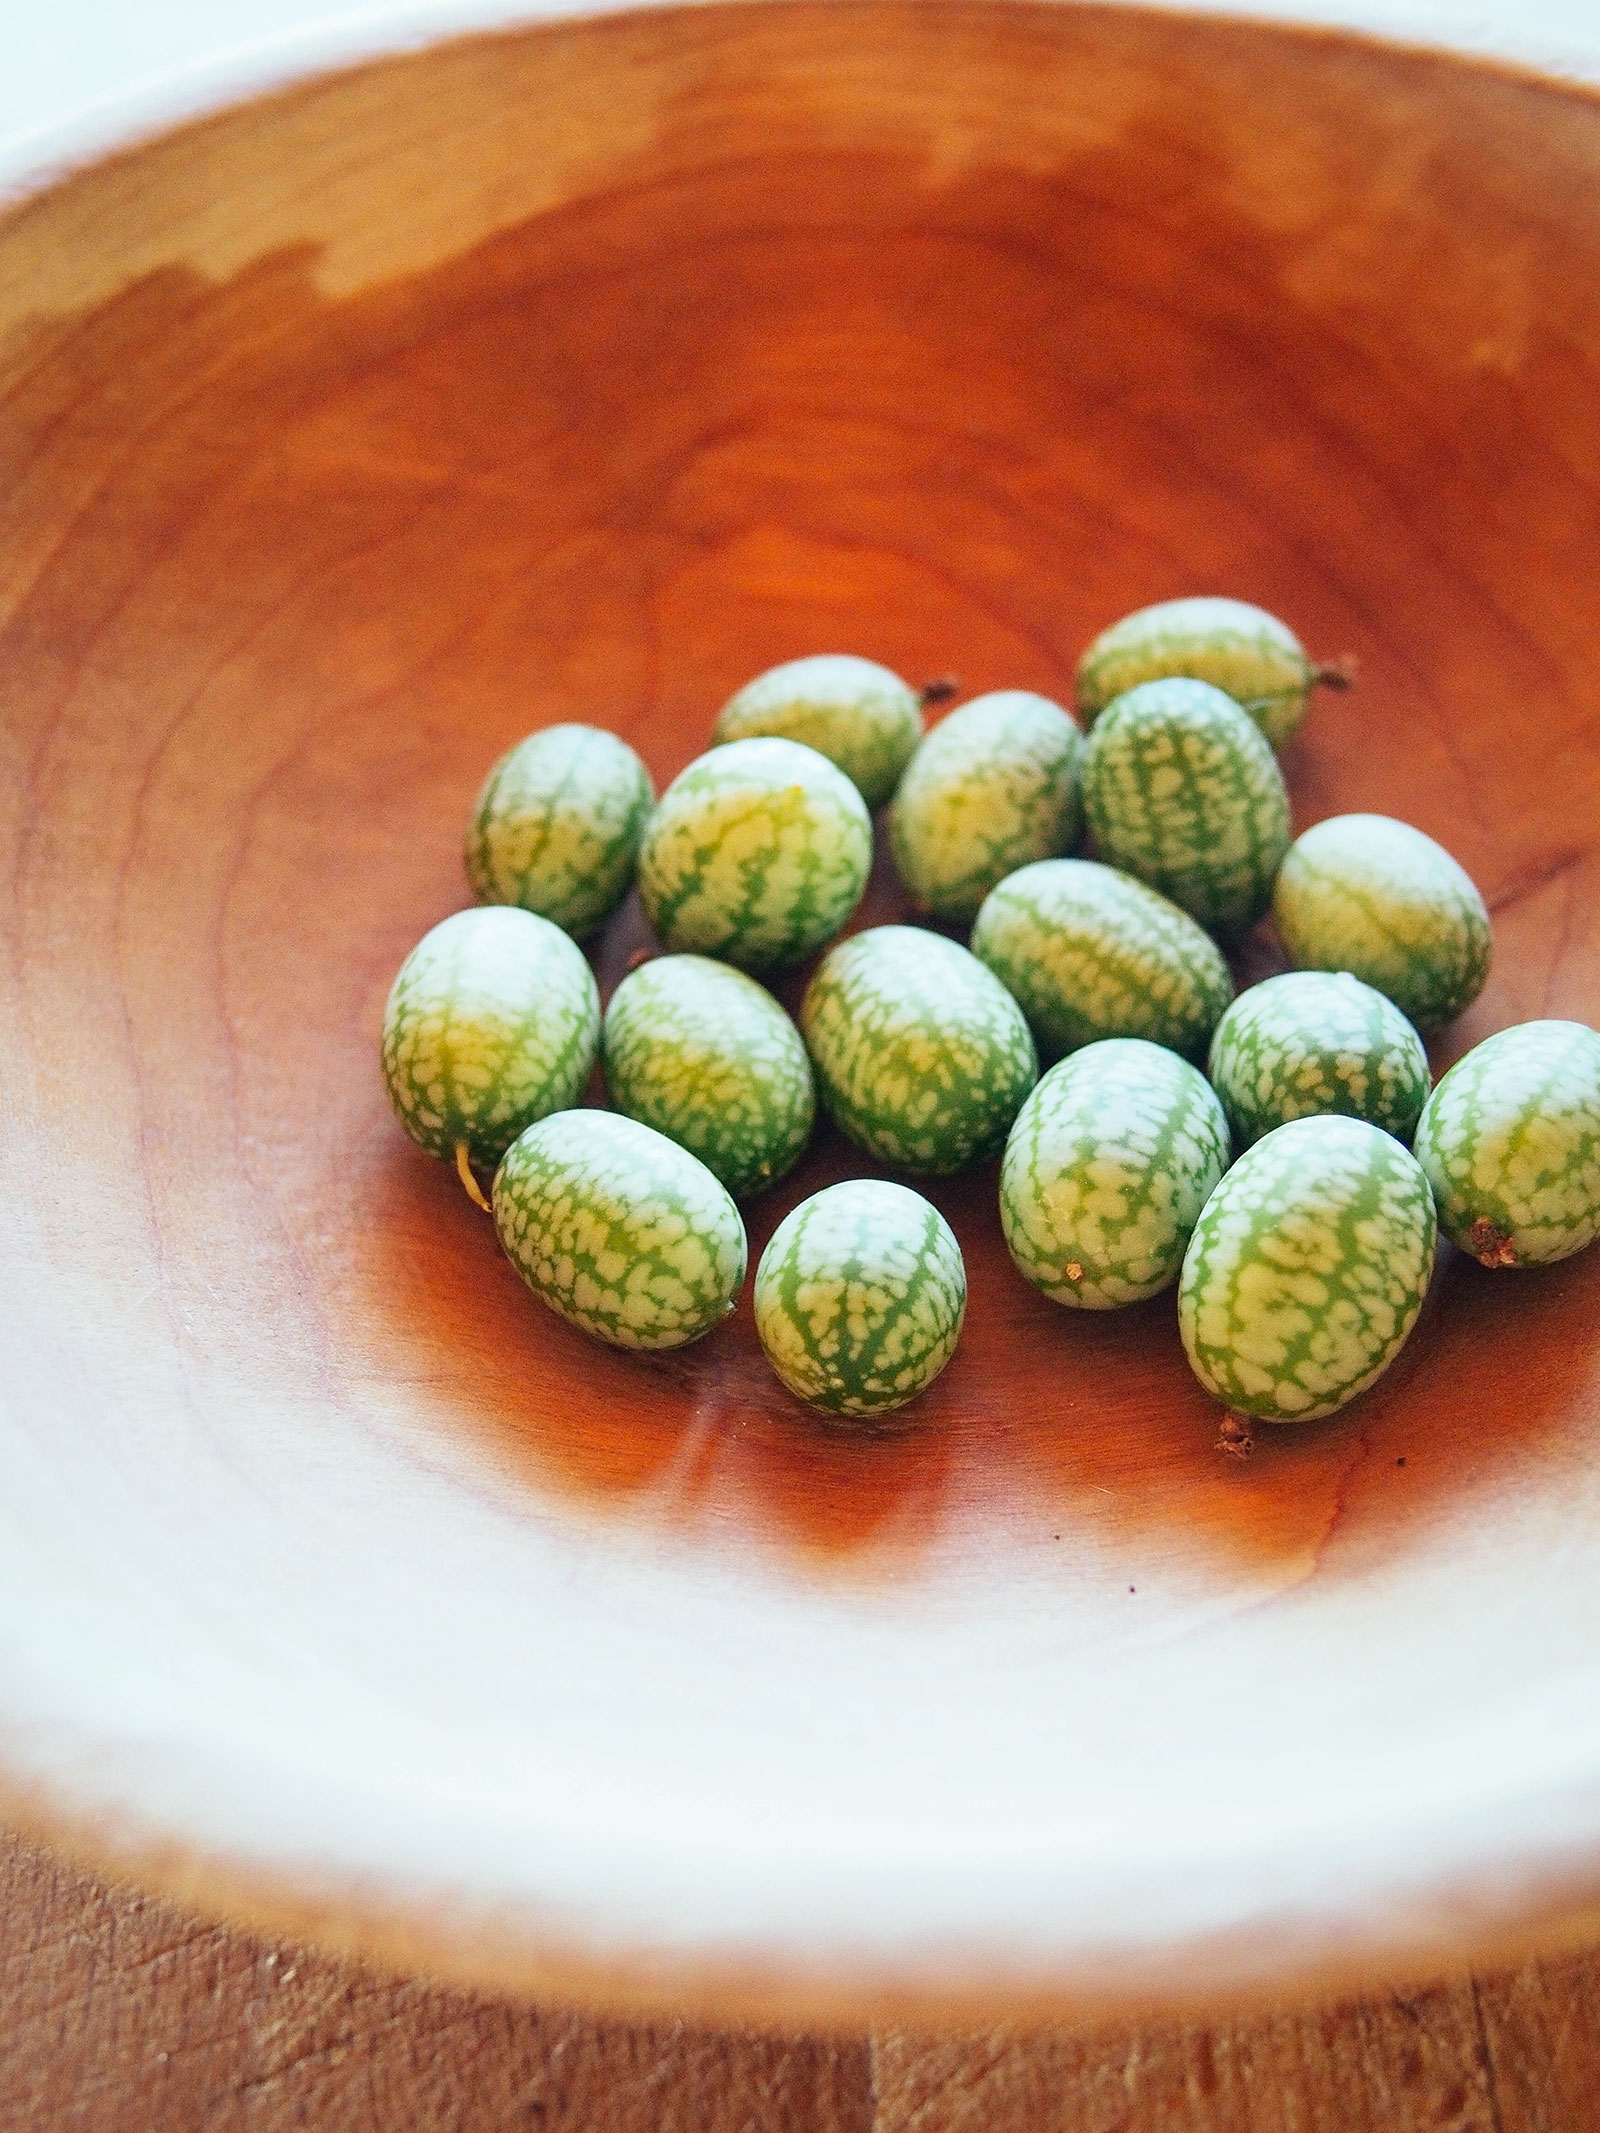 All about cucamelons: how to grow and what to do with them (Mexican sour gherkins)